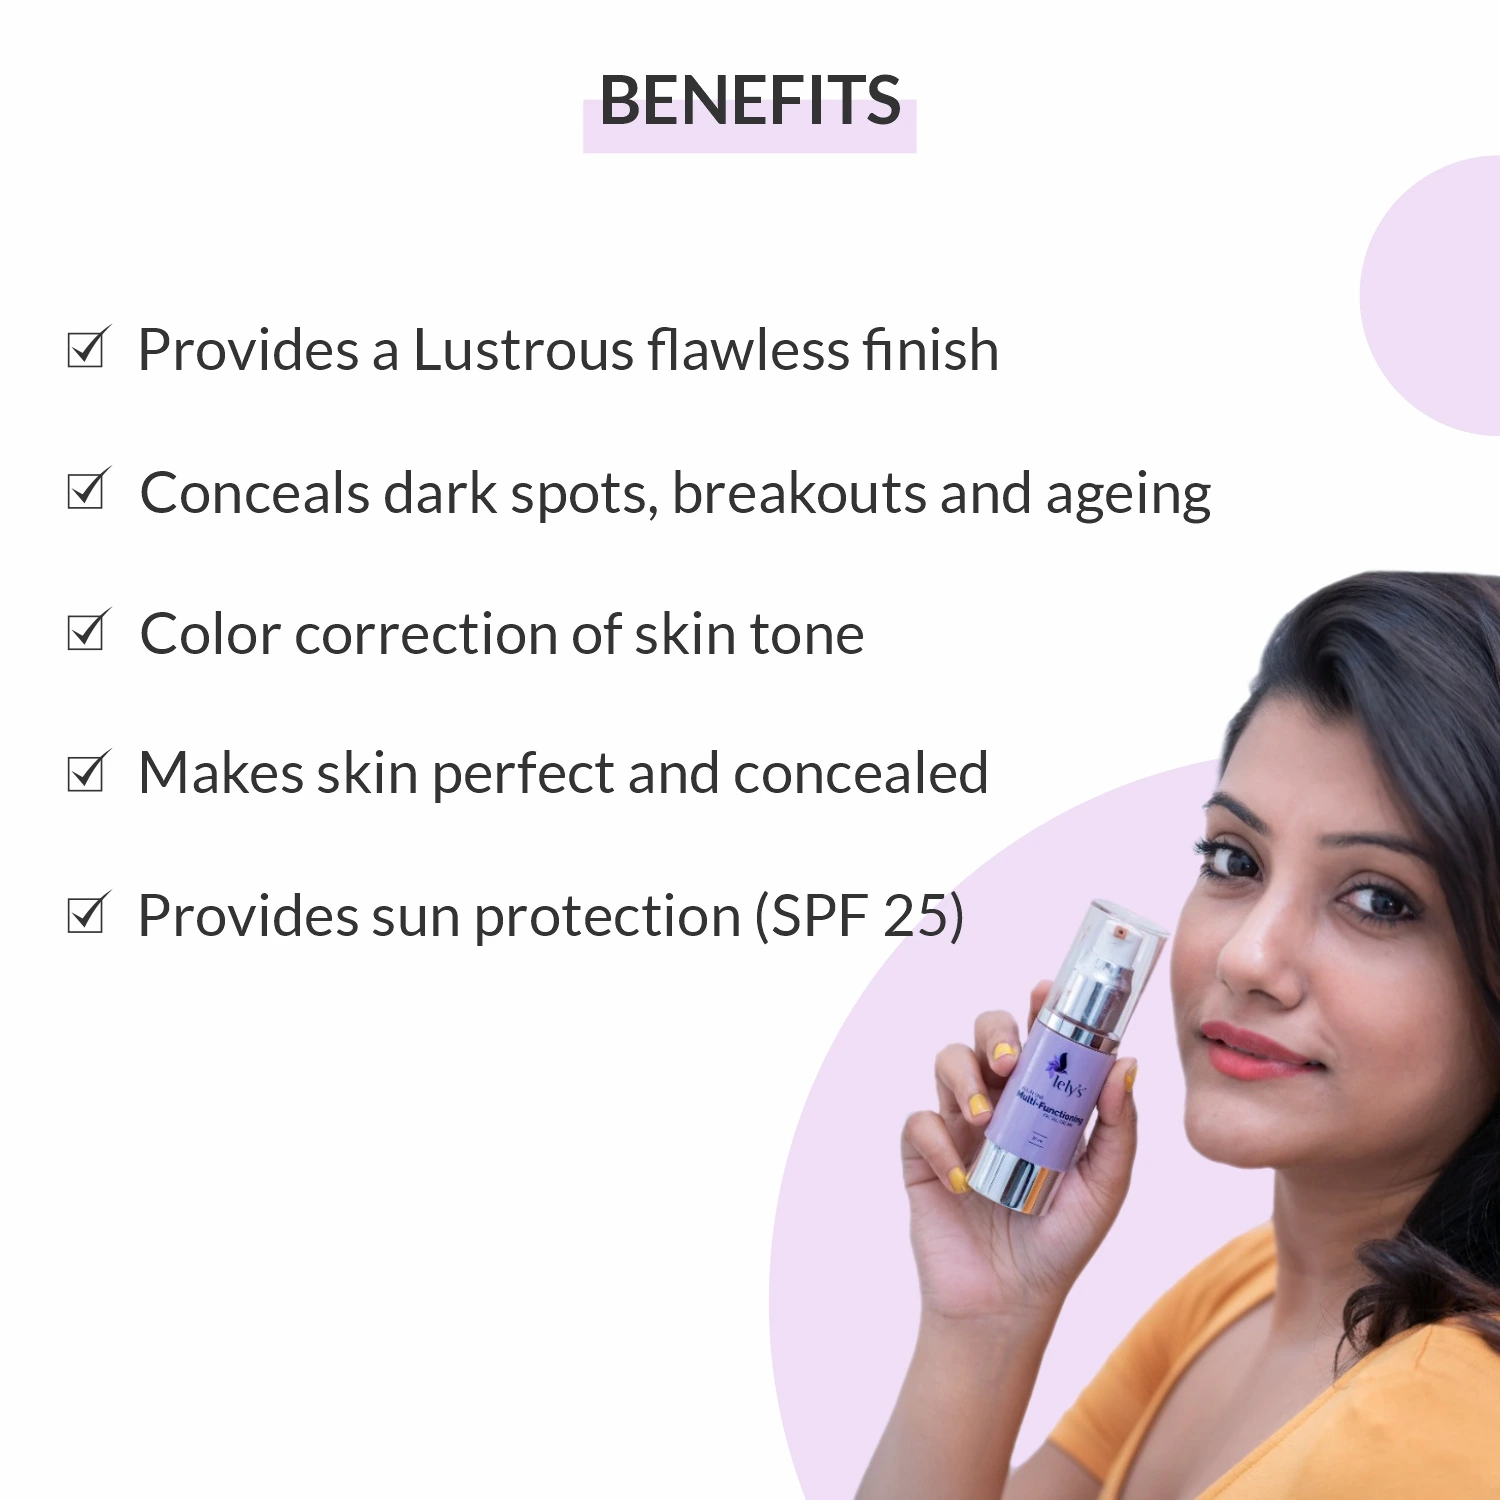 All In One Multi-Functioning Face Cream Benefits